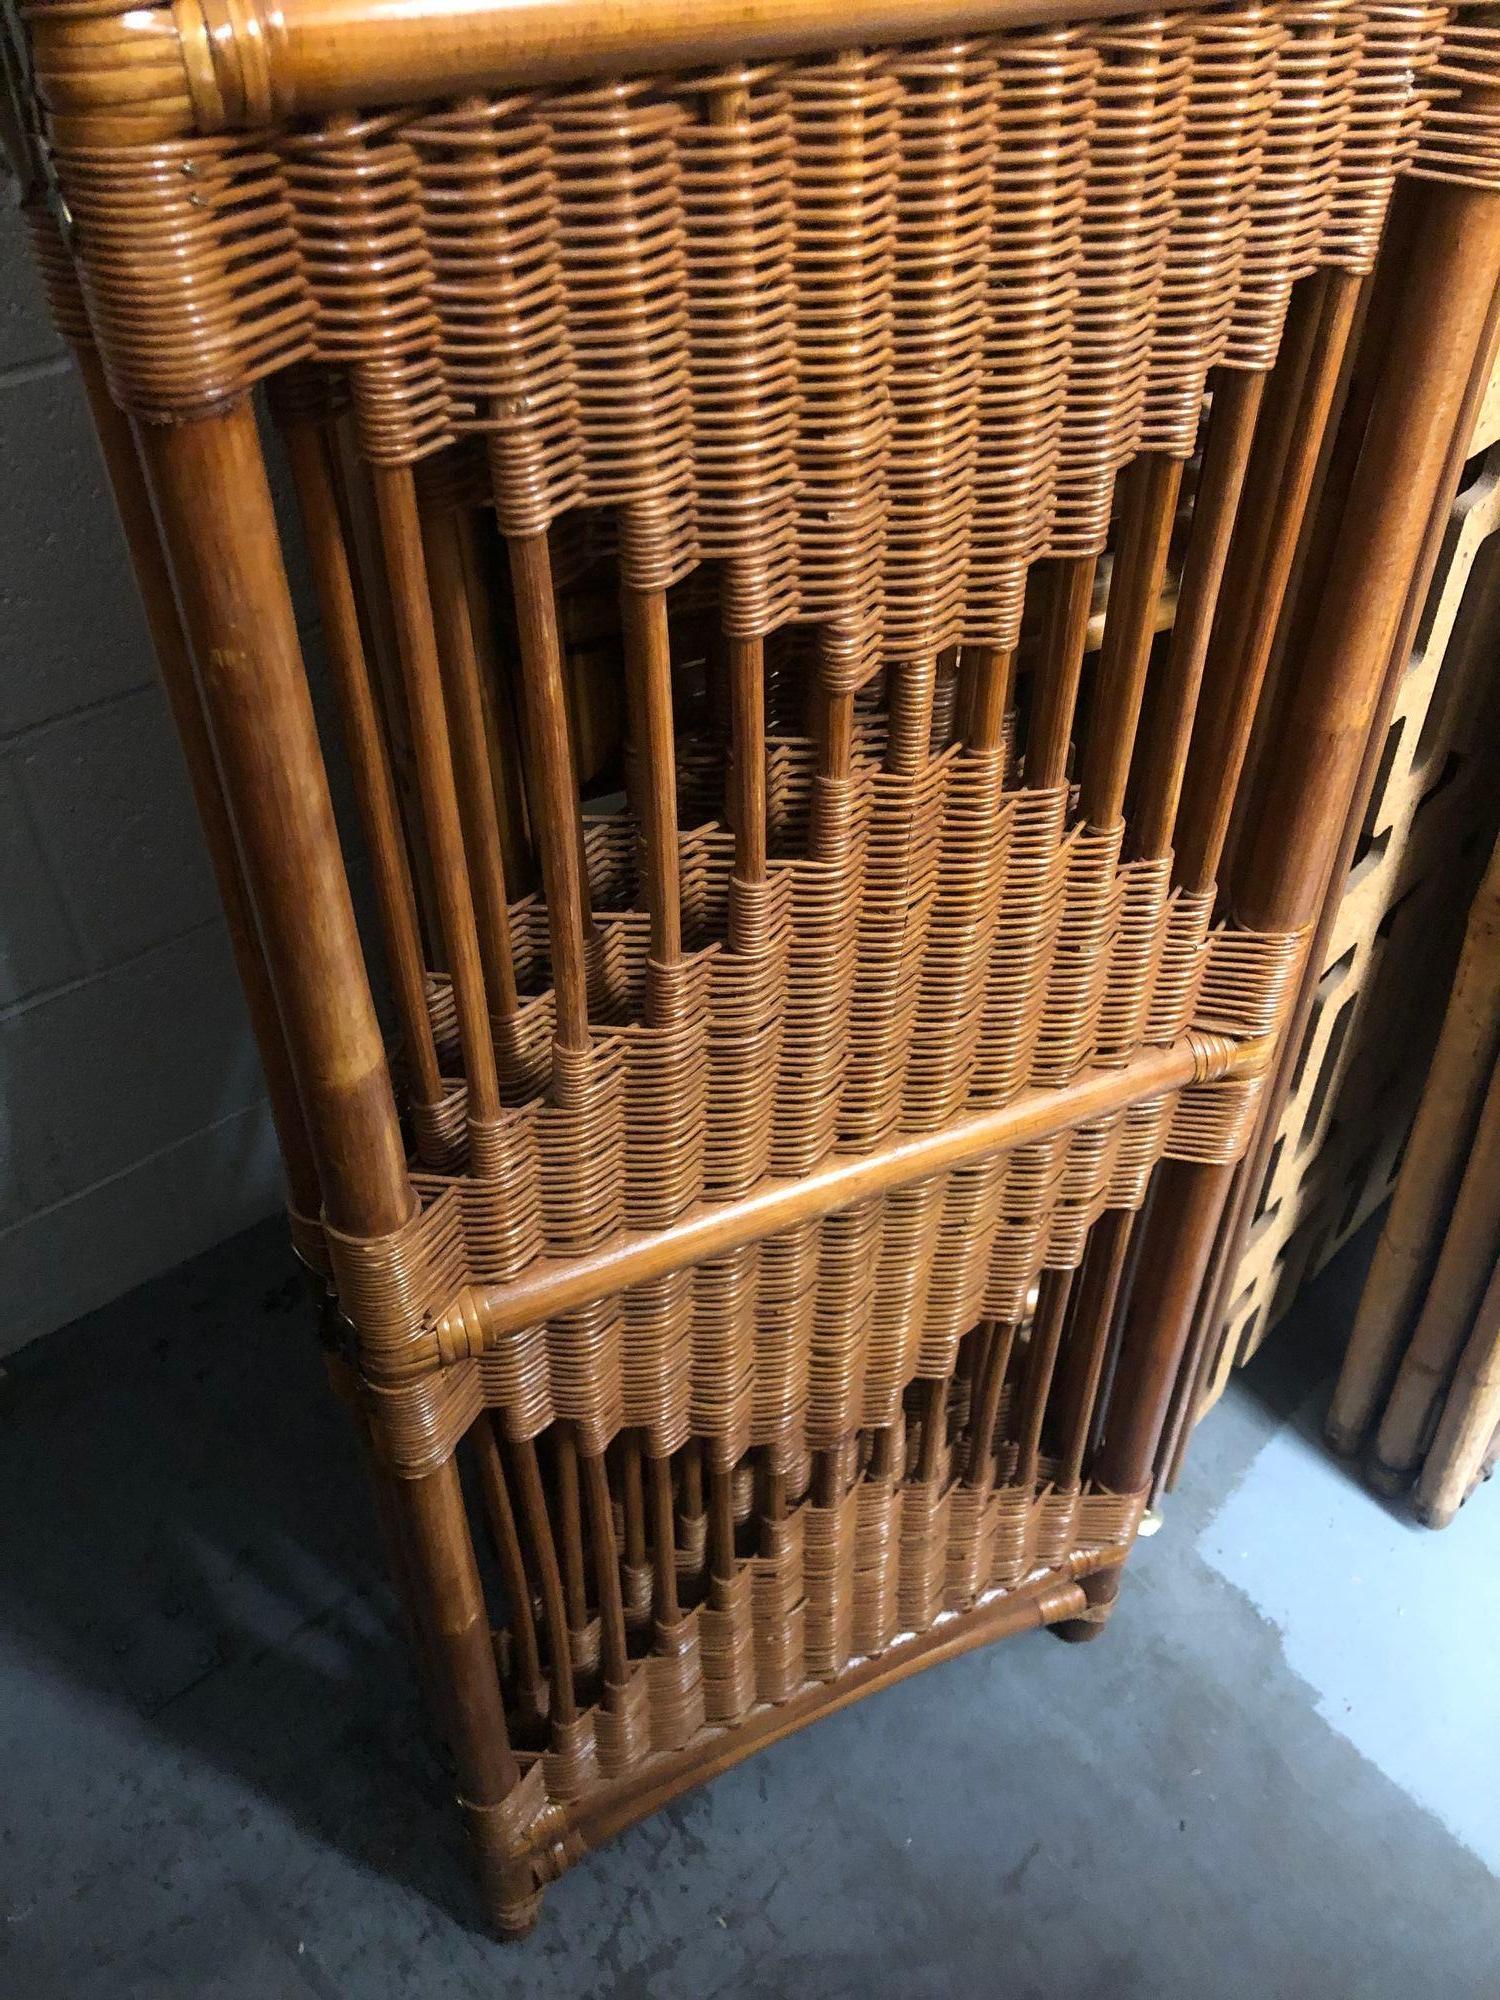 Folding Screen, Rattan and Woven Wicker 3 Panel In Excellent Condition For Sale In Van Nuys, CA